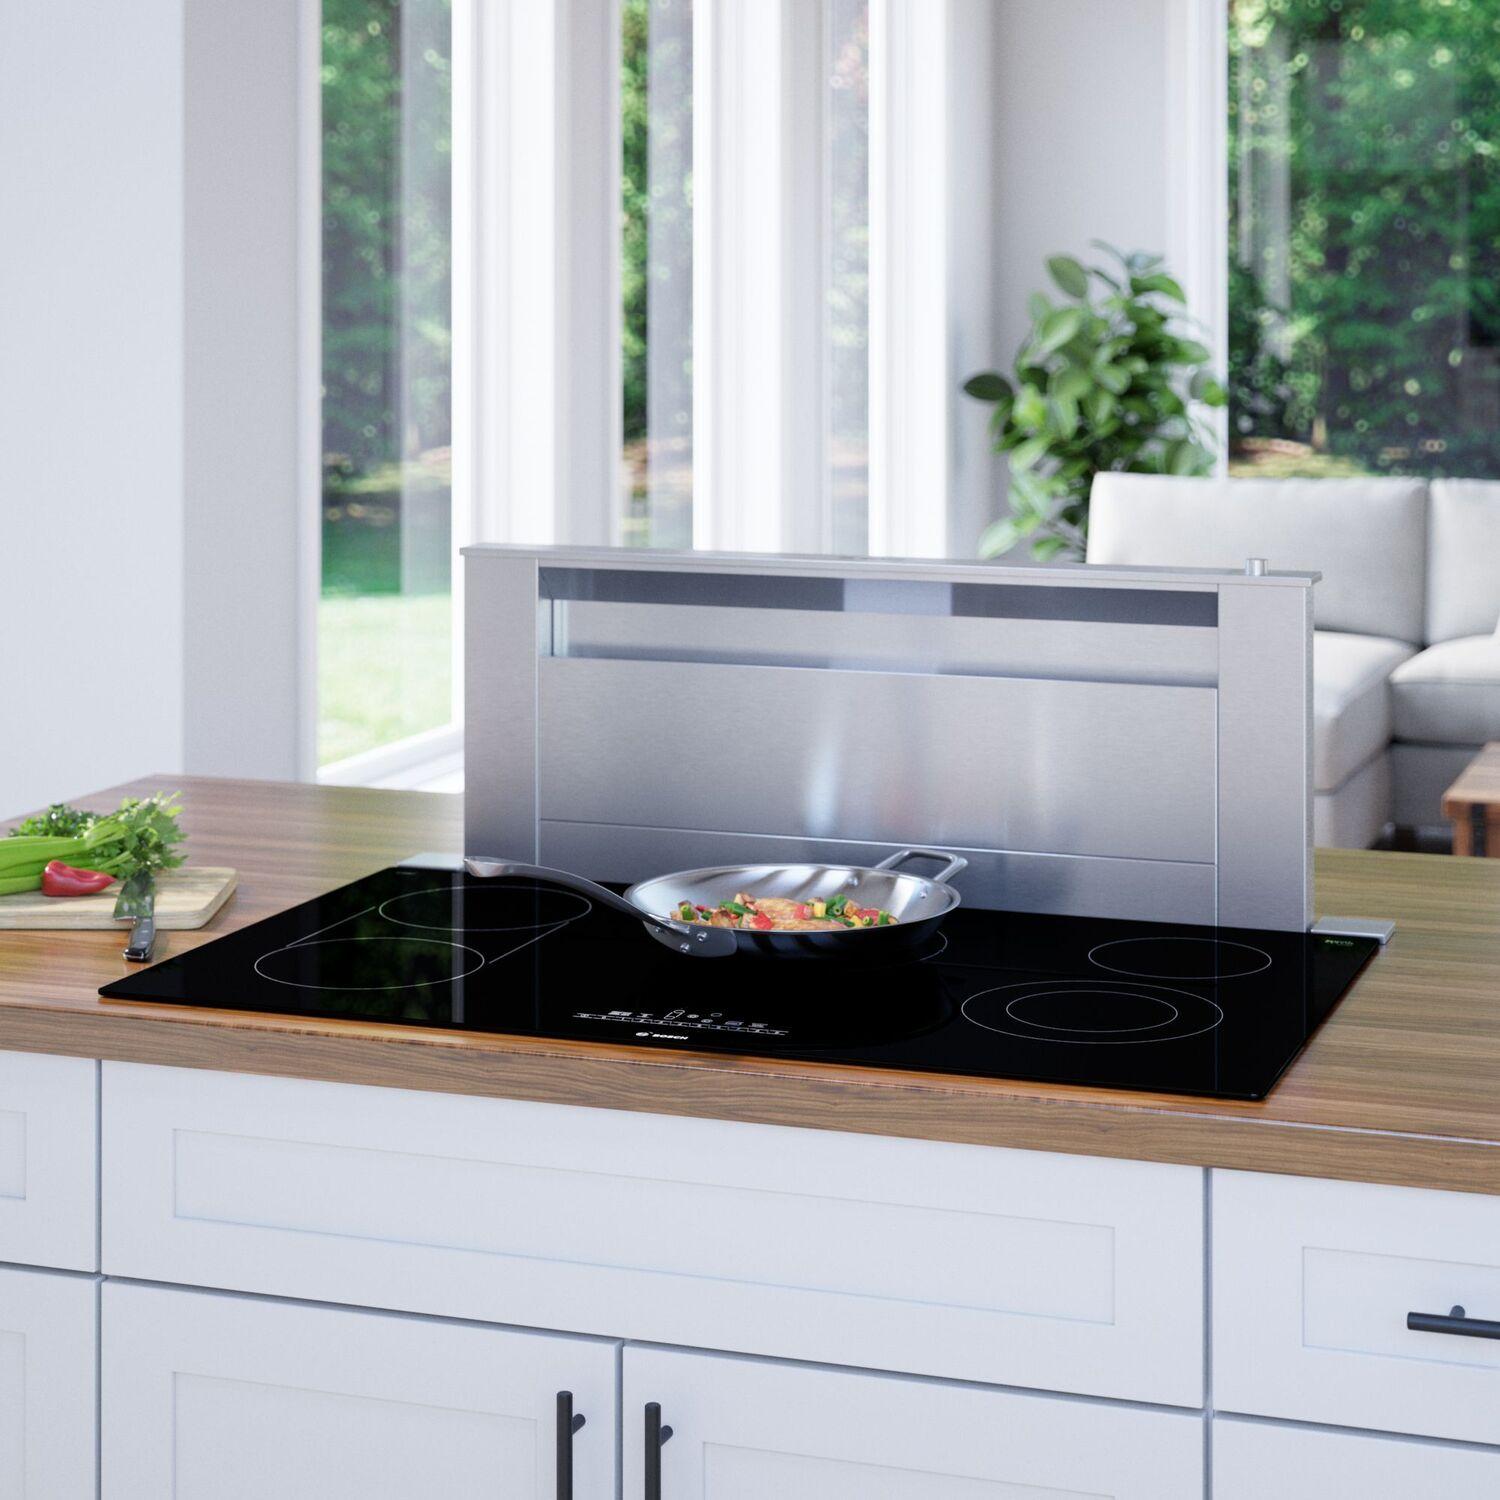 Bosch NET8669UC 800 Series Electric Cooktop 36'' Black, Surface Mount Without Frame Net8669Uc